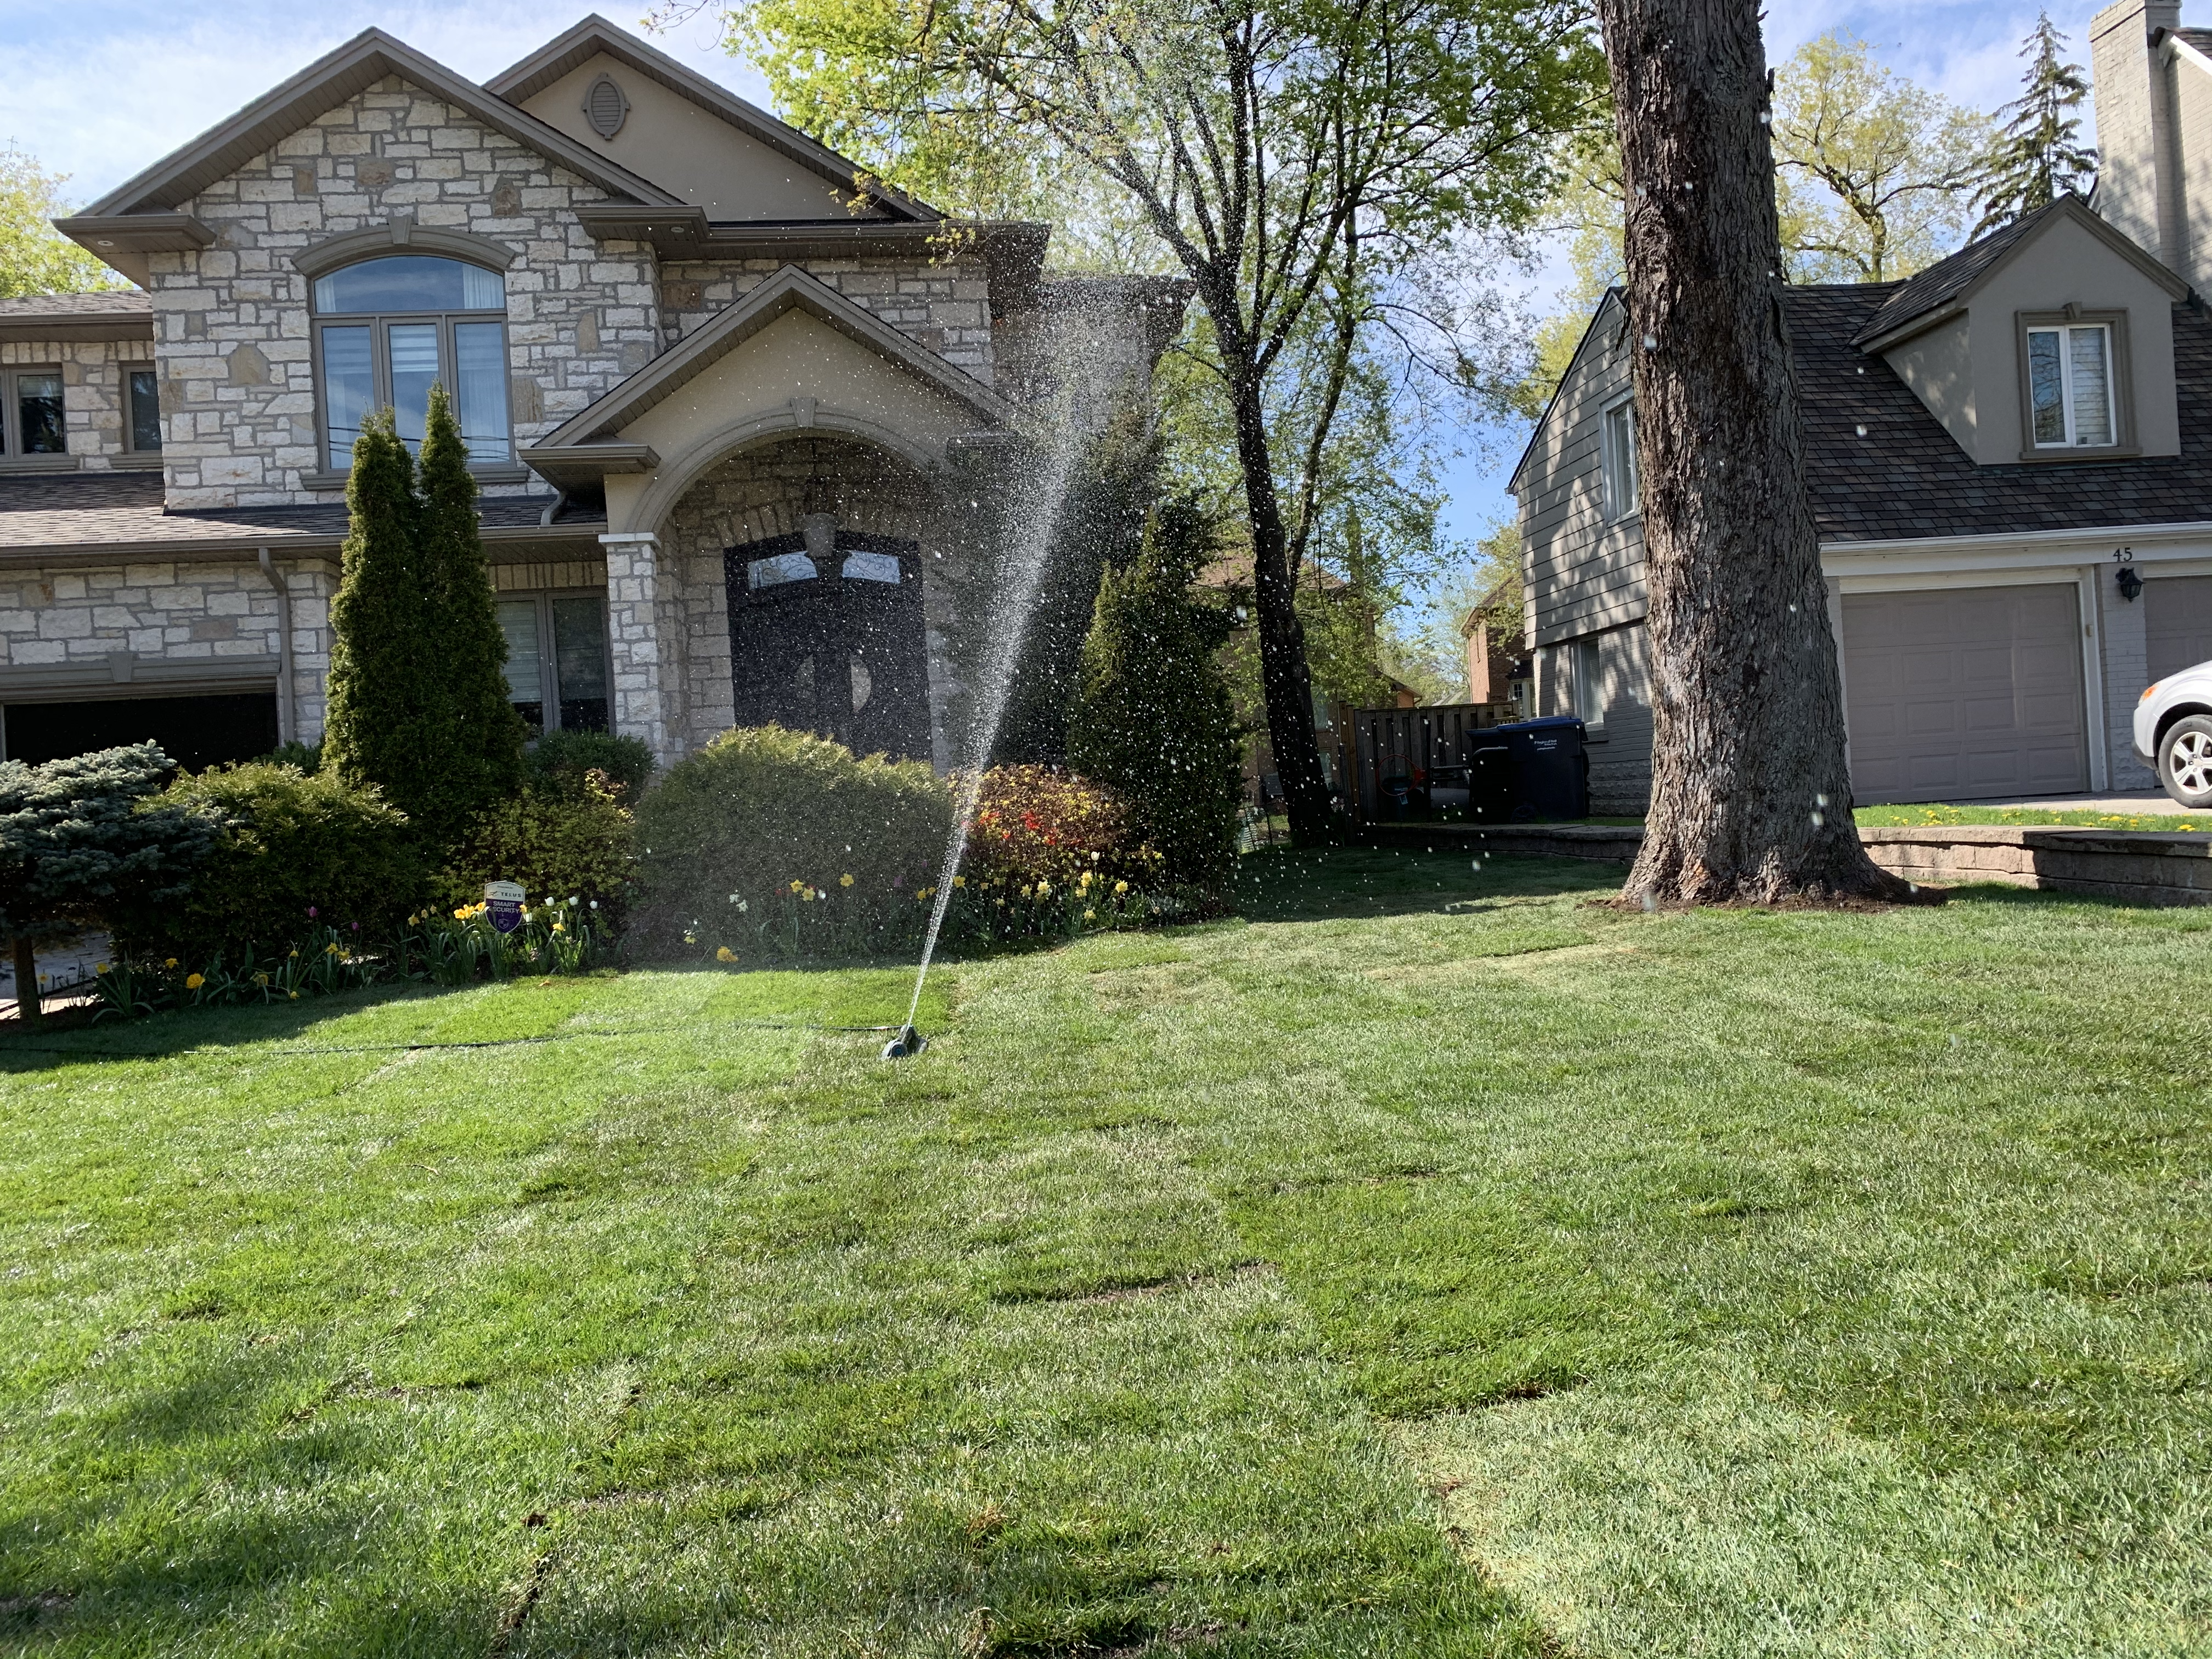 house with brand new sod laid by erindale landscaping